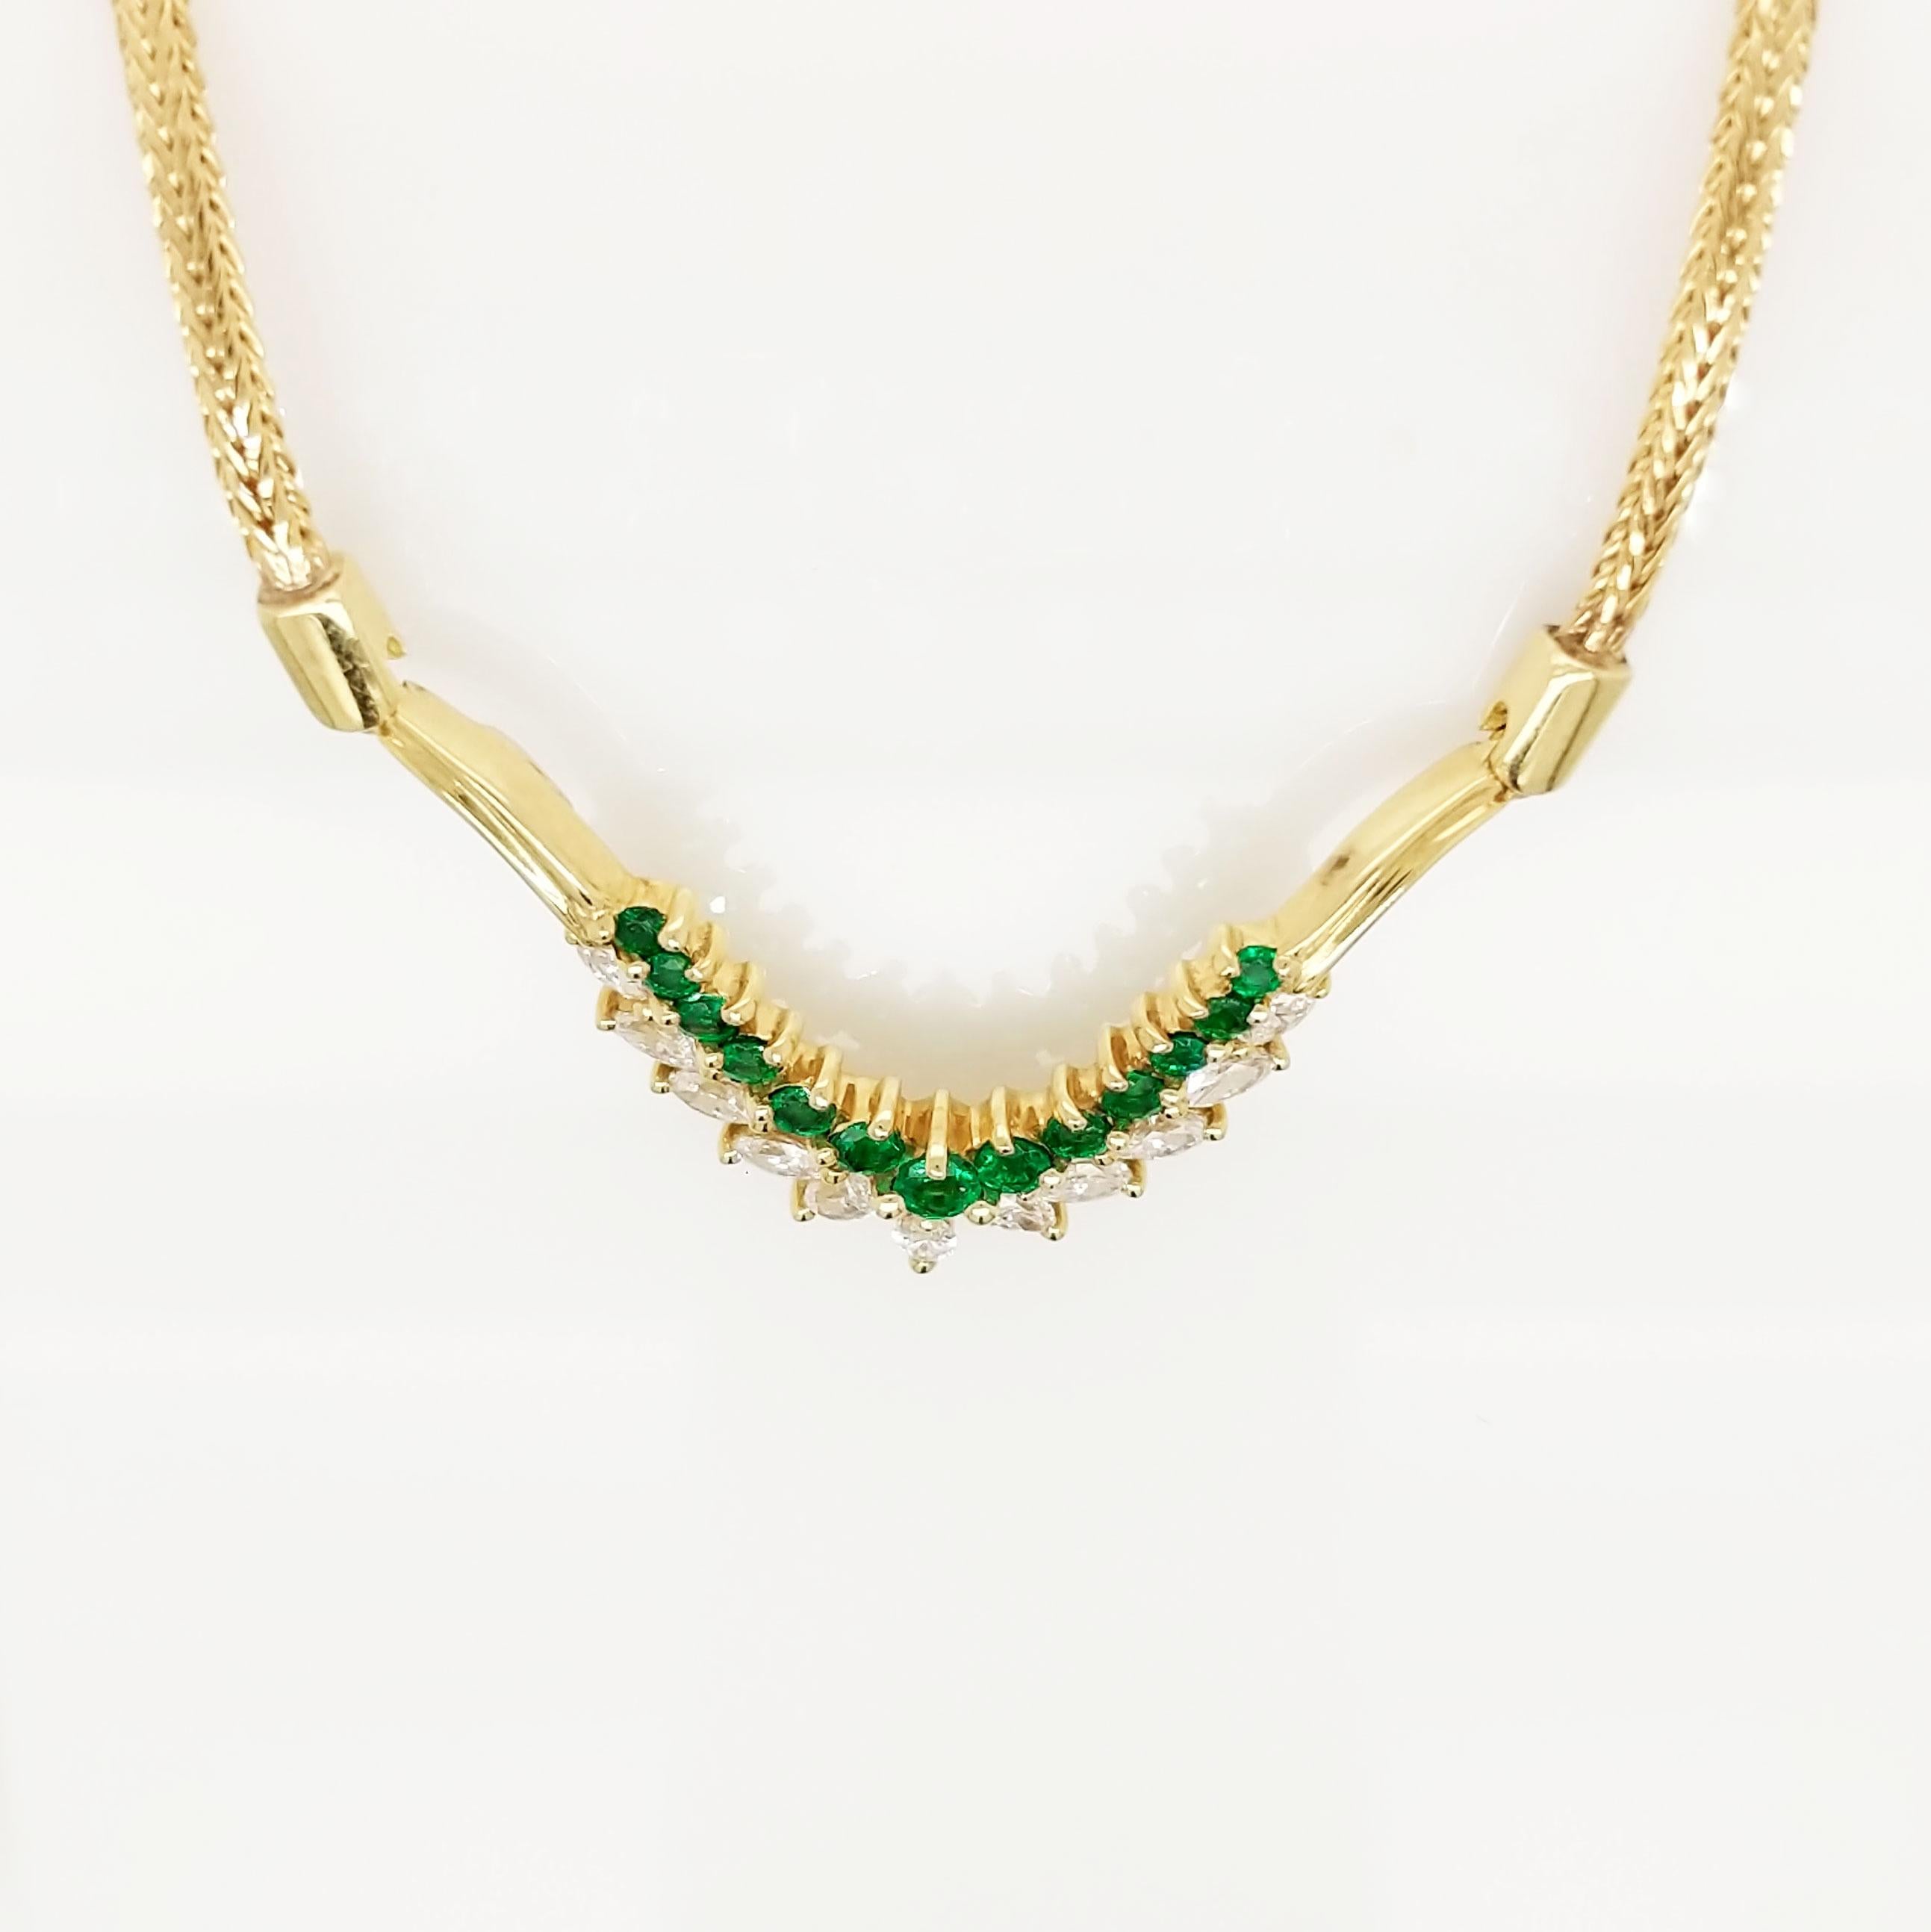 1960s Black, Starr & Frost 18K Yellow Gold Diamond and Emerald Necklace In Excellent Condition For Sale In Lexington, KY